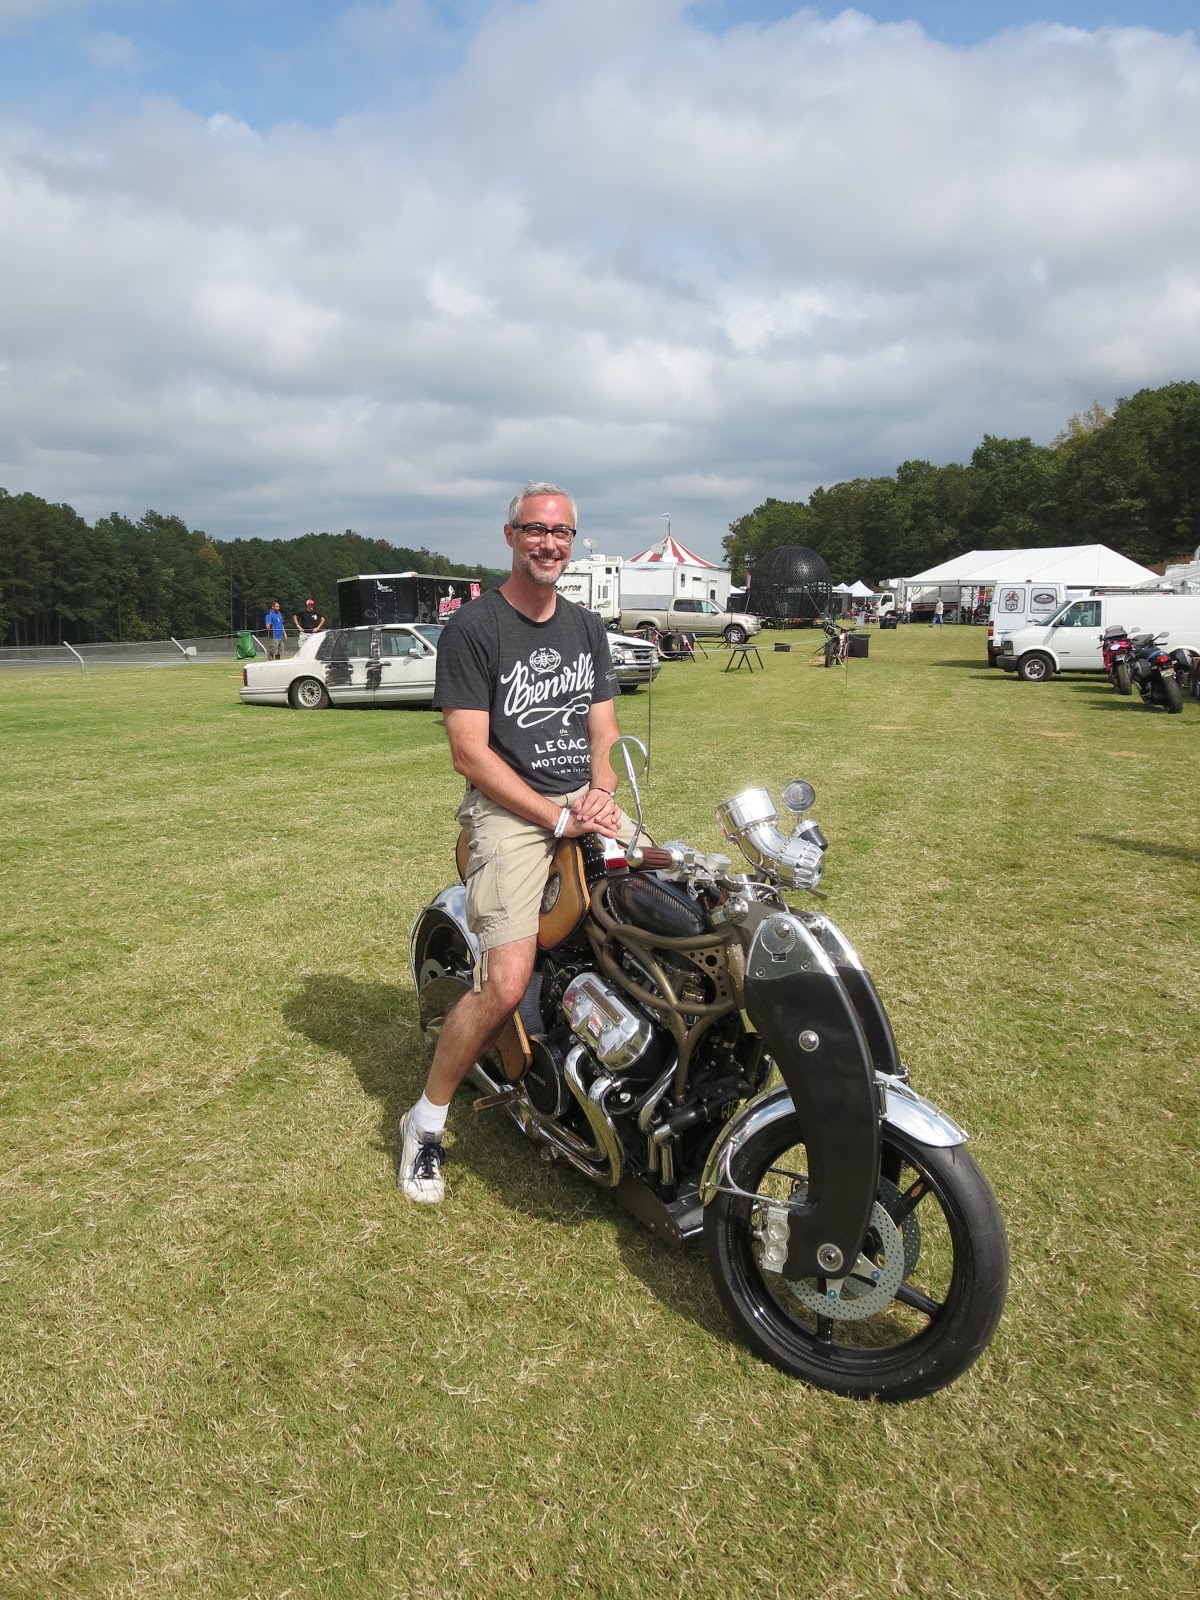 Jim Jacoby with his Bienville Legacy Motorcycle